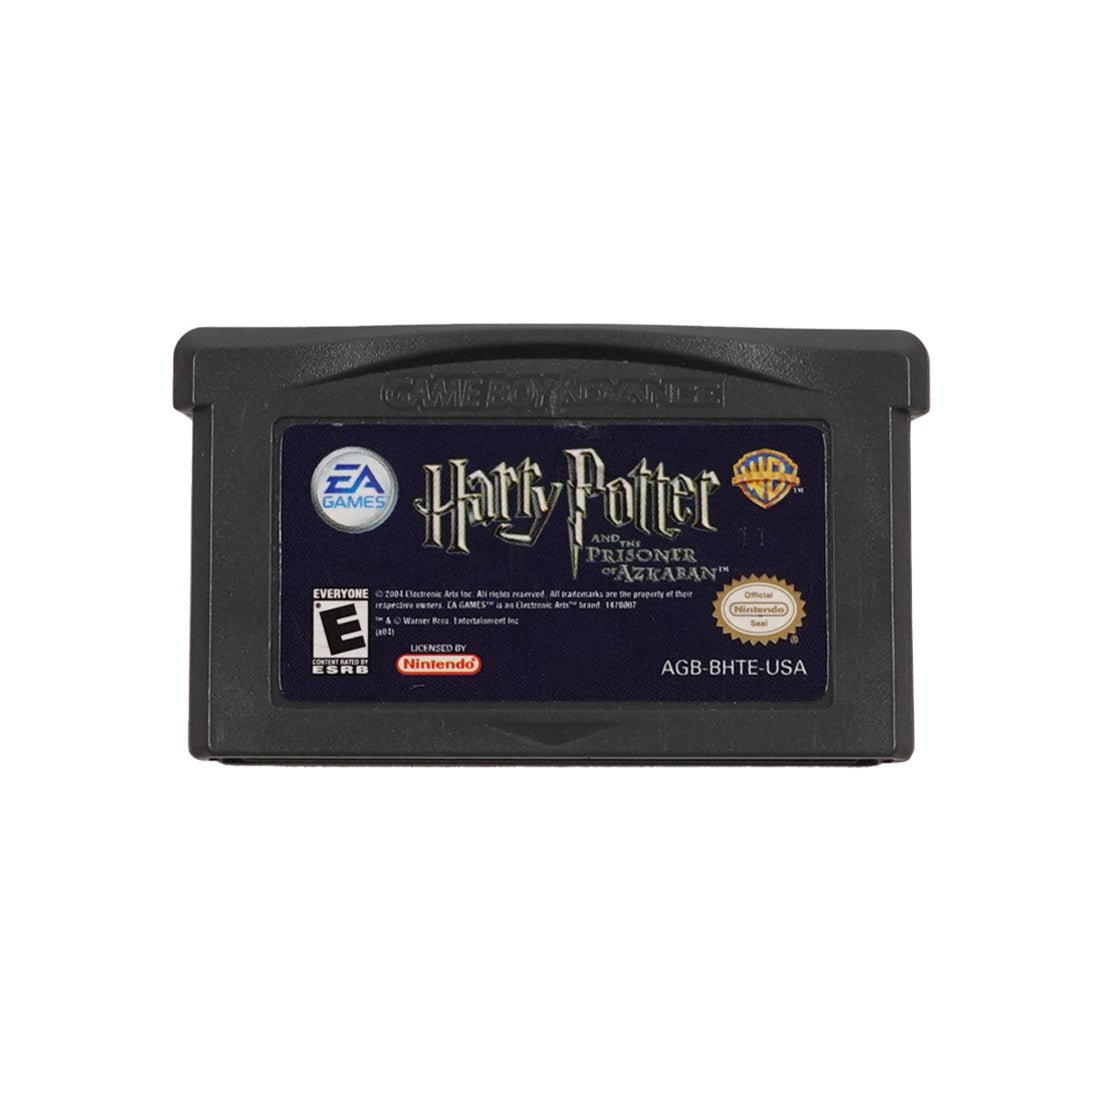 (Pre-Owned) Harry Potter and the Prisoner of Azkaban - Gameboy Advance - Store 974 | ستور ٩٧٤